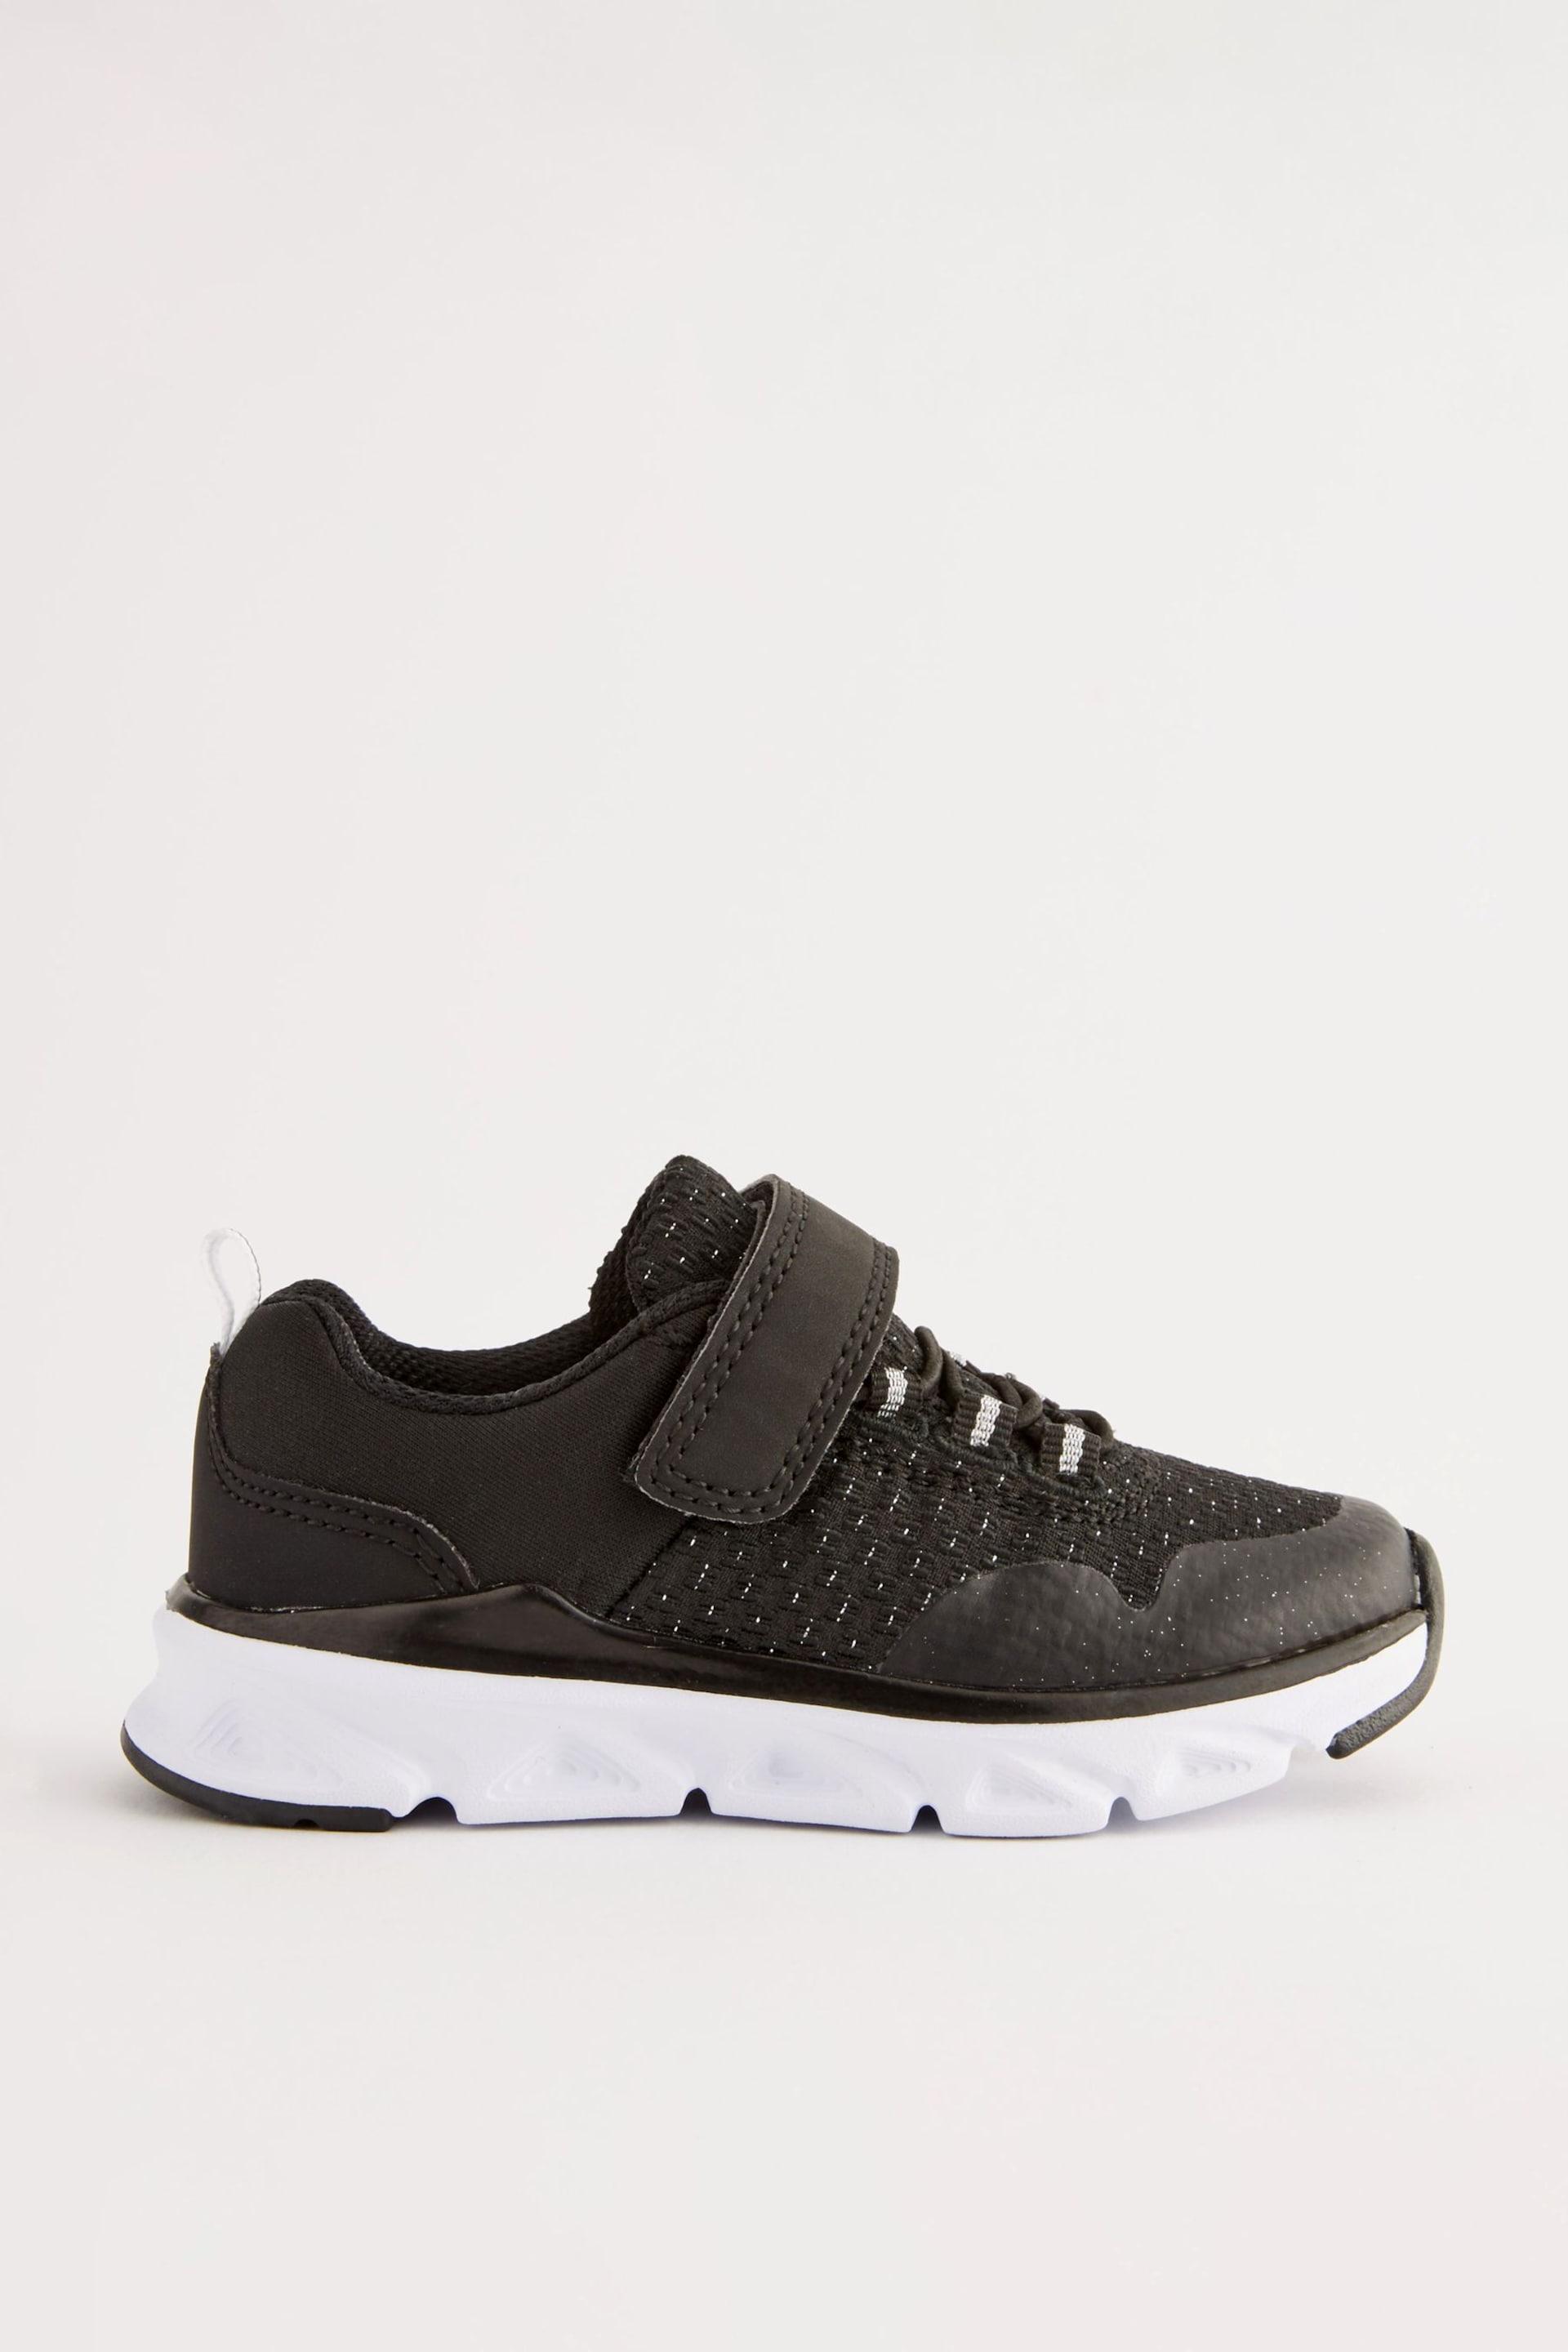 Black Sports Trainers - Image 2 of 5